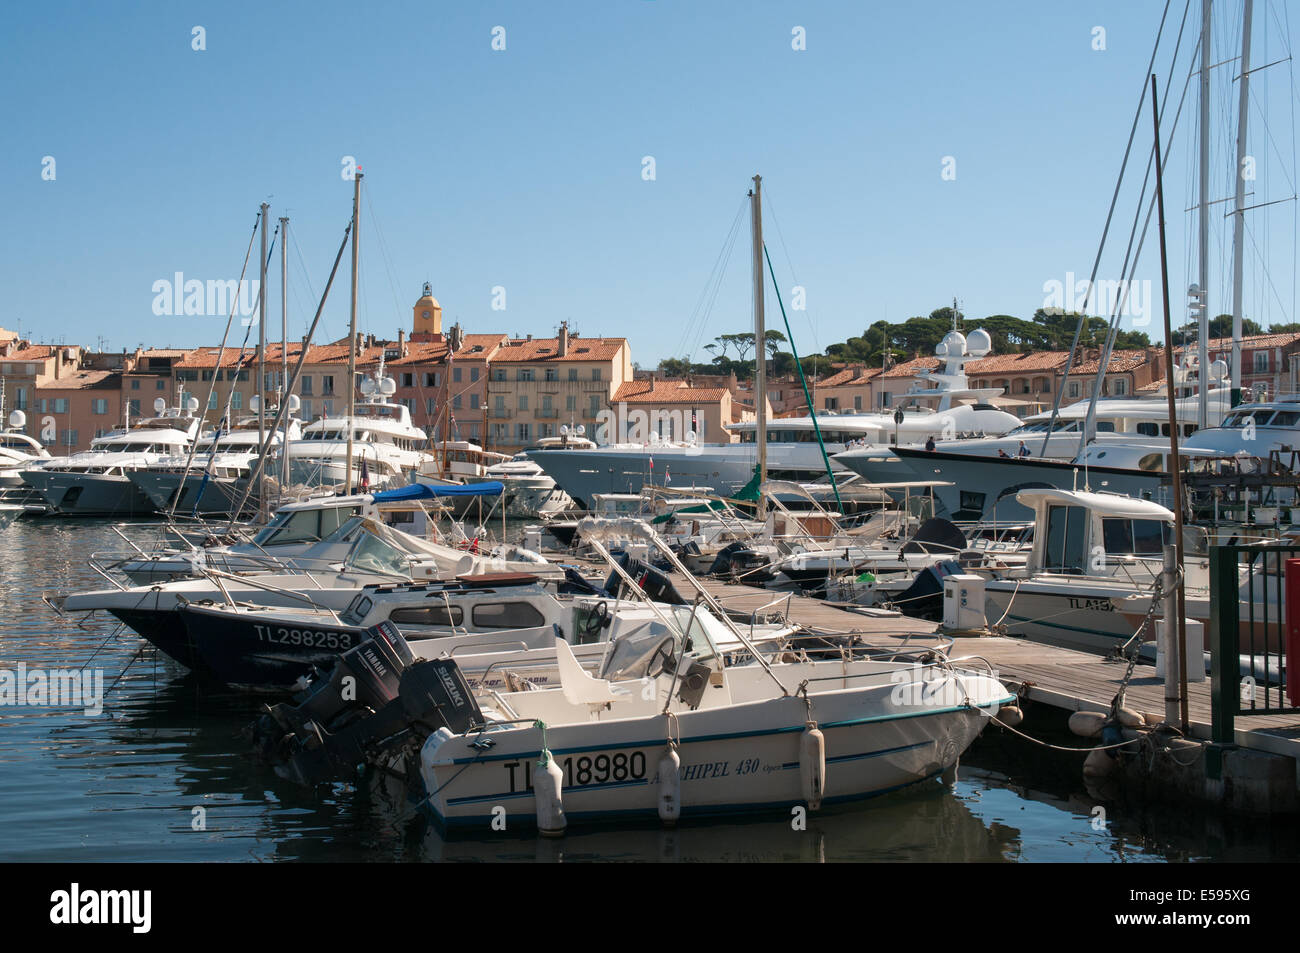 A selection of boats moored in the harbour at St Tropez, France Stock Photo